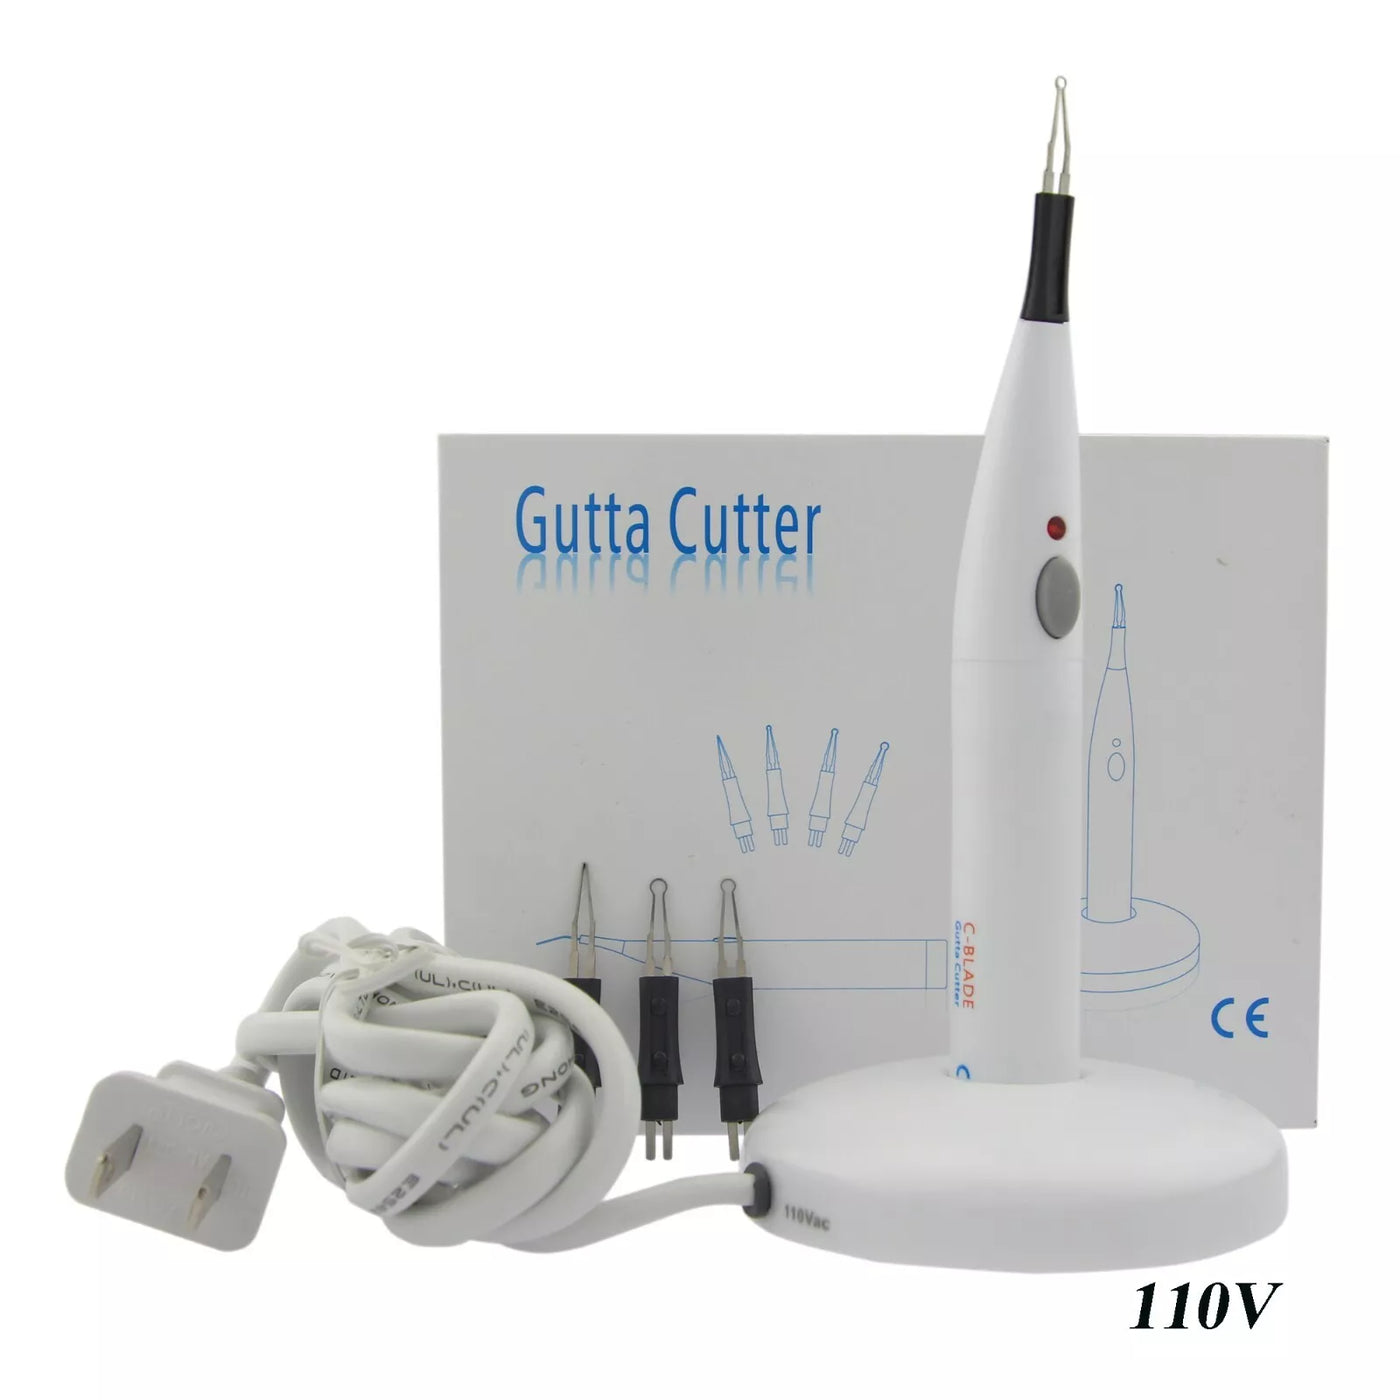 Image of a C-Blade Cordless Gutta Percha Cutter with white casing and a red button near the tip. The tool is placed on a wireless charging base with a power cord and plug. Behind it, there is a box displaying the tool's image and accessories. Text reads "VSDent C-Blade Cordless Gutta Percha Cutter with 4 Tips 110V. (4119993319523)